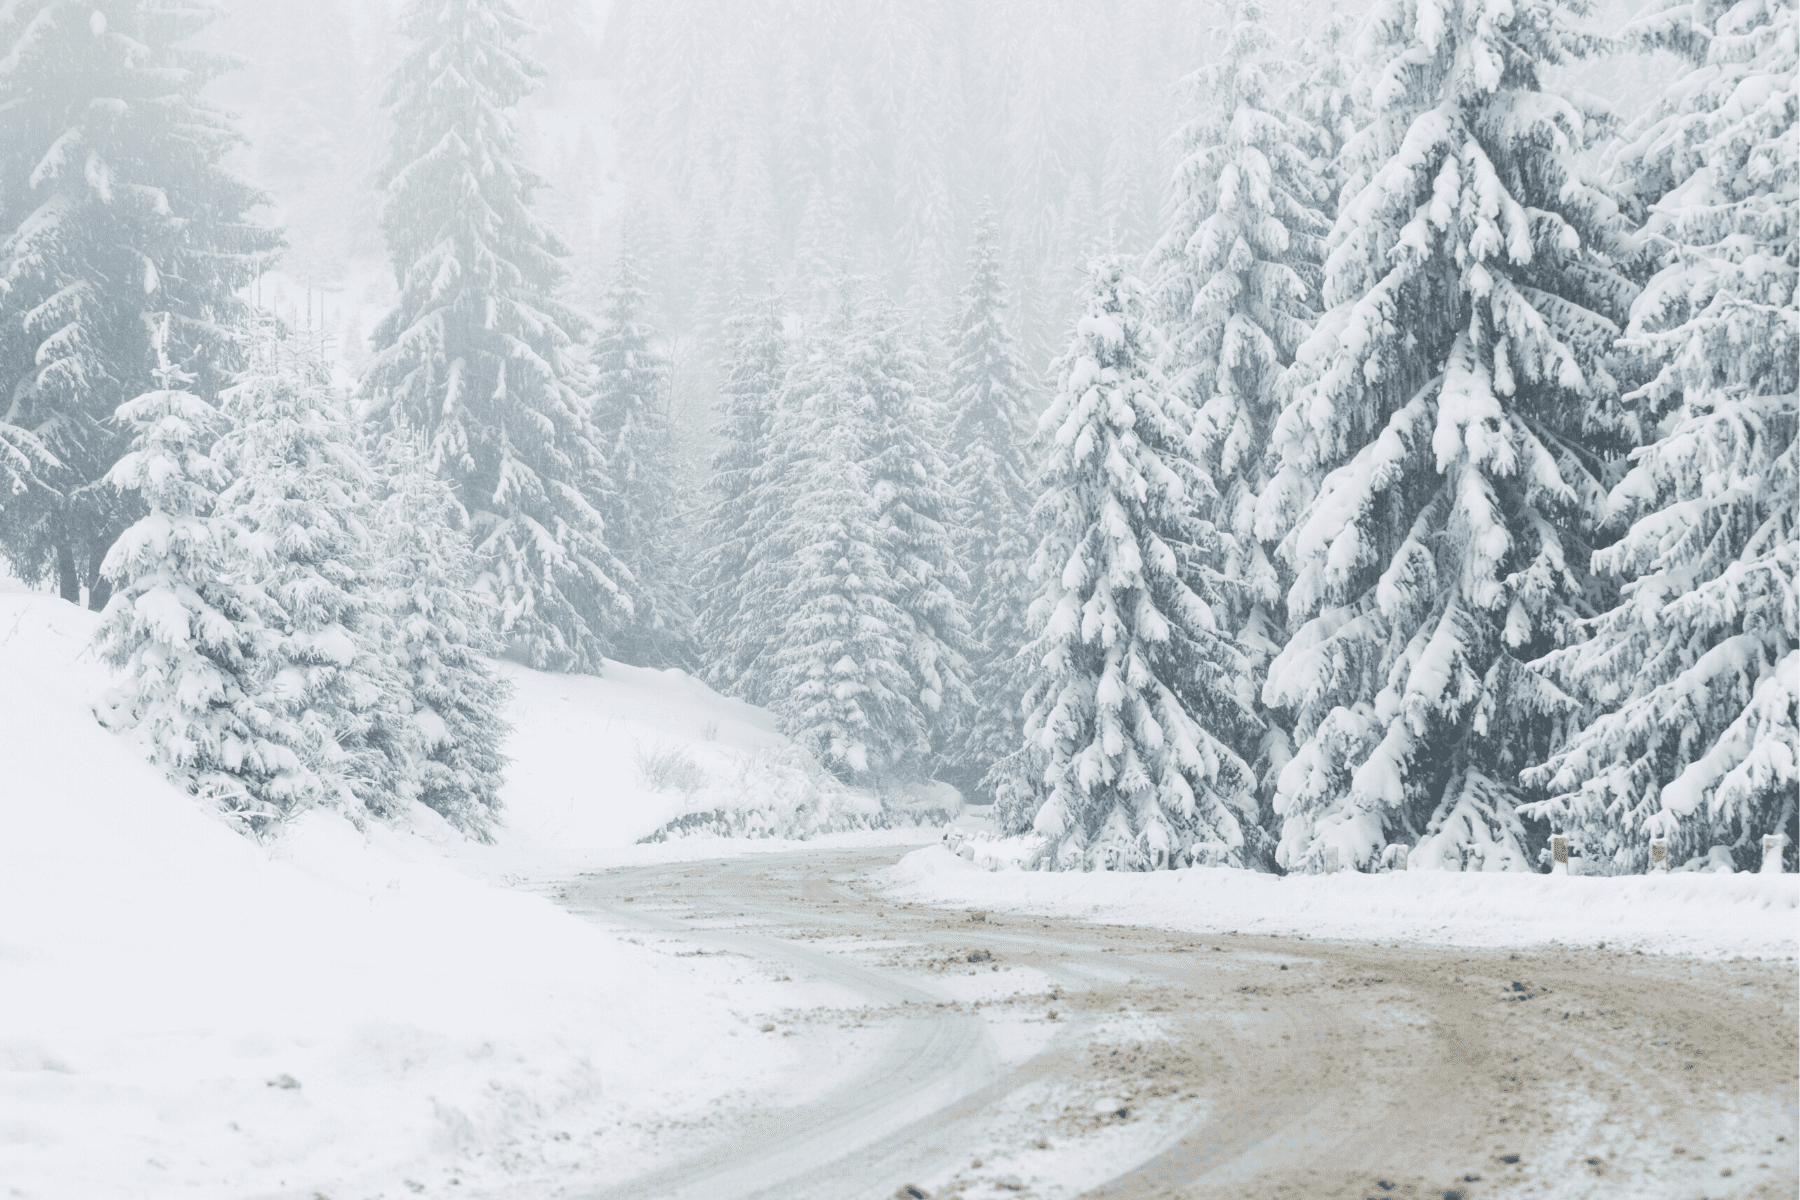 A road surrounded by trees and covered in snow